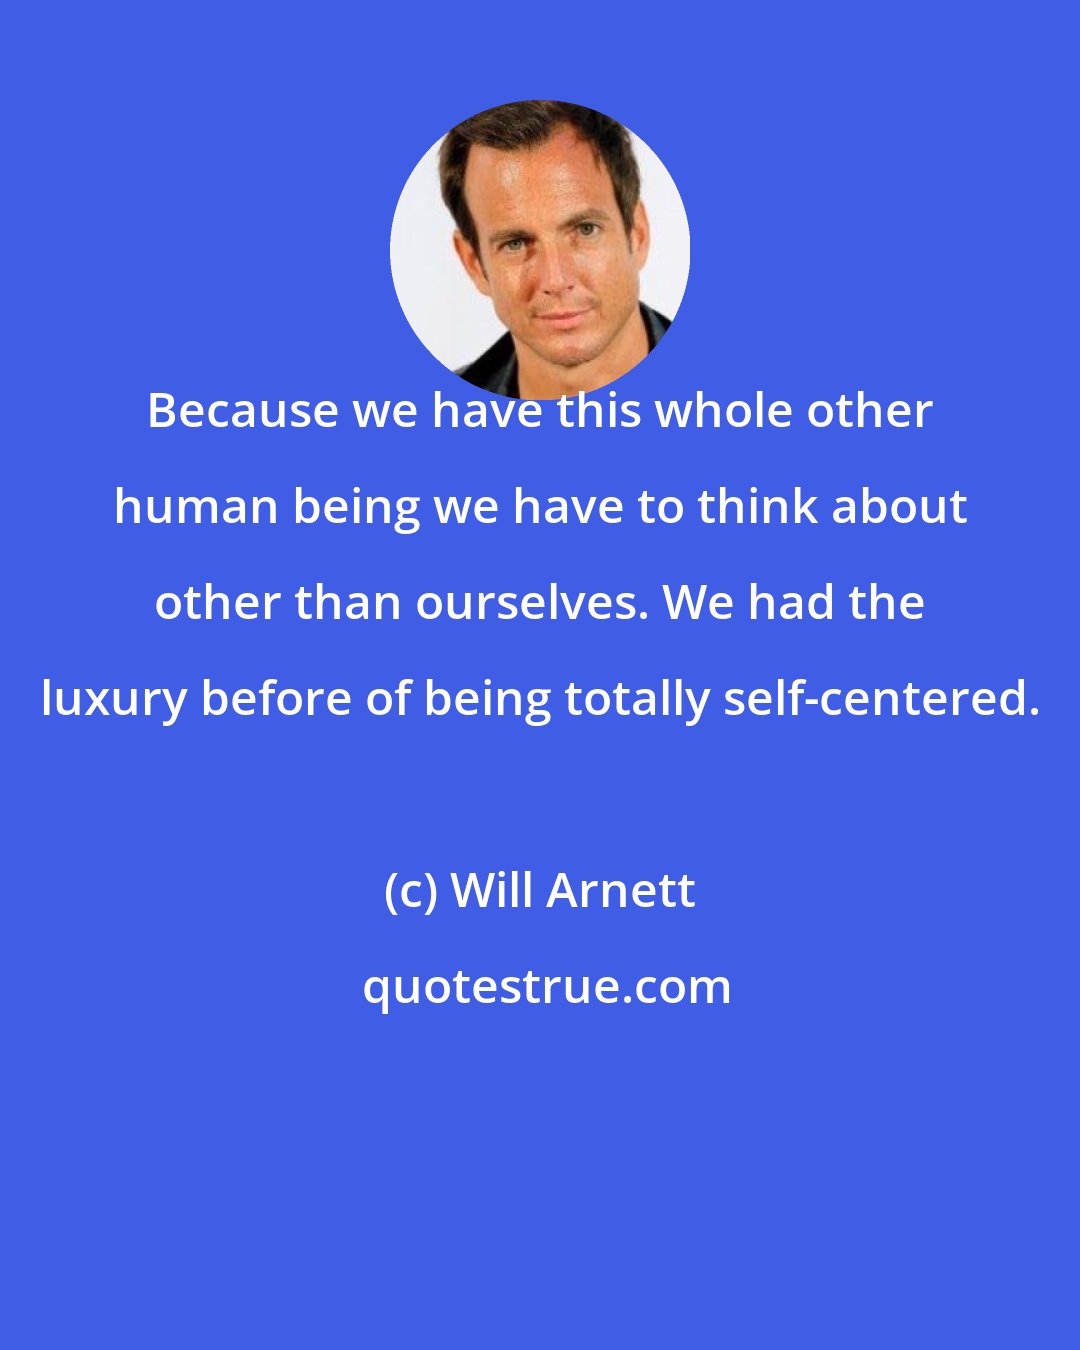 Will Arnett: Because we have this whole other human being we have to think about other than ourselves. We had the luxury before of being totally self-centered.